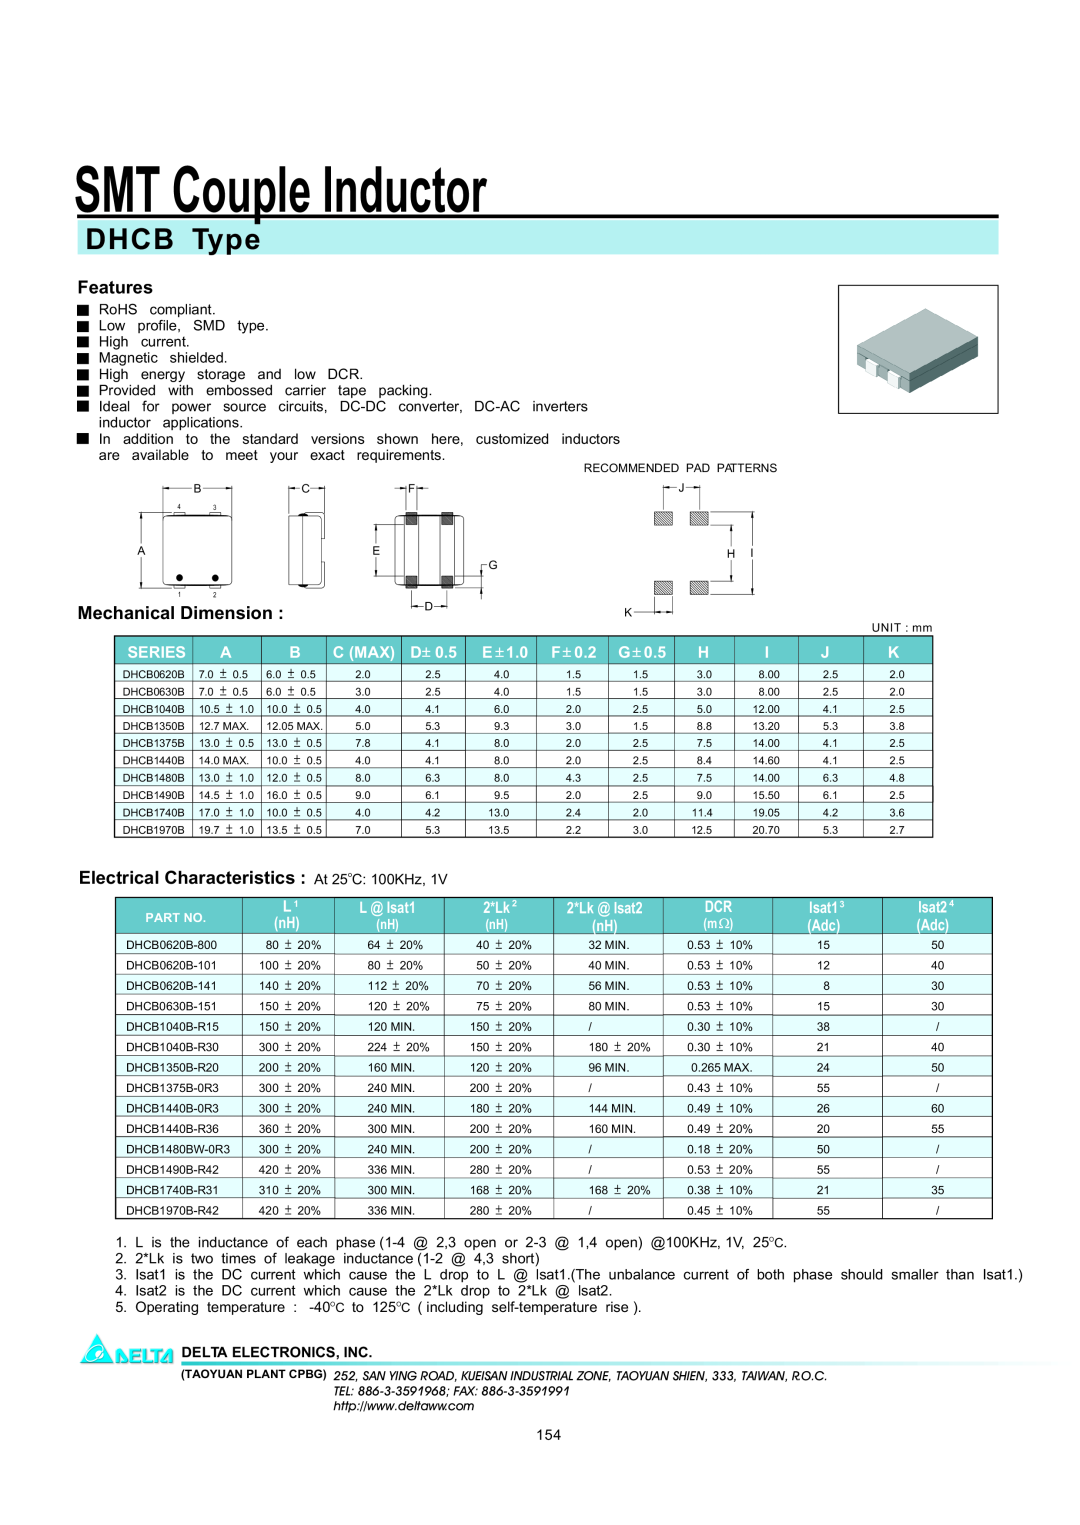 Delta Electronics manual SMT Couple Inductor, DHCB Type, Features, Mechanical Dimension, Series, L @ Isat1, 2*Lk 